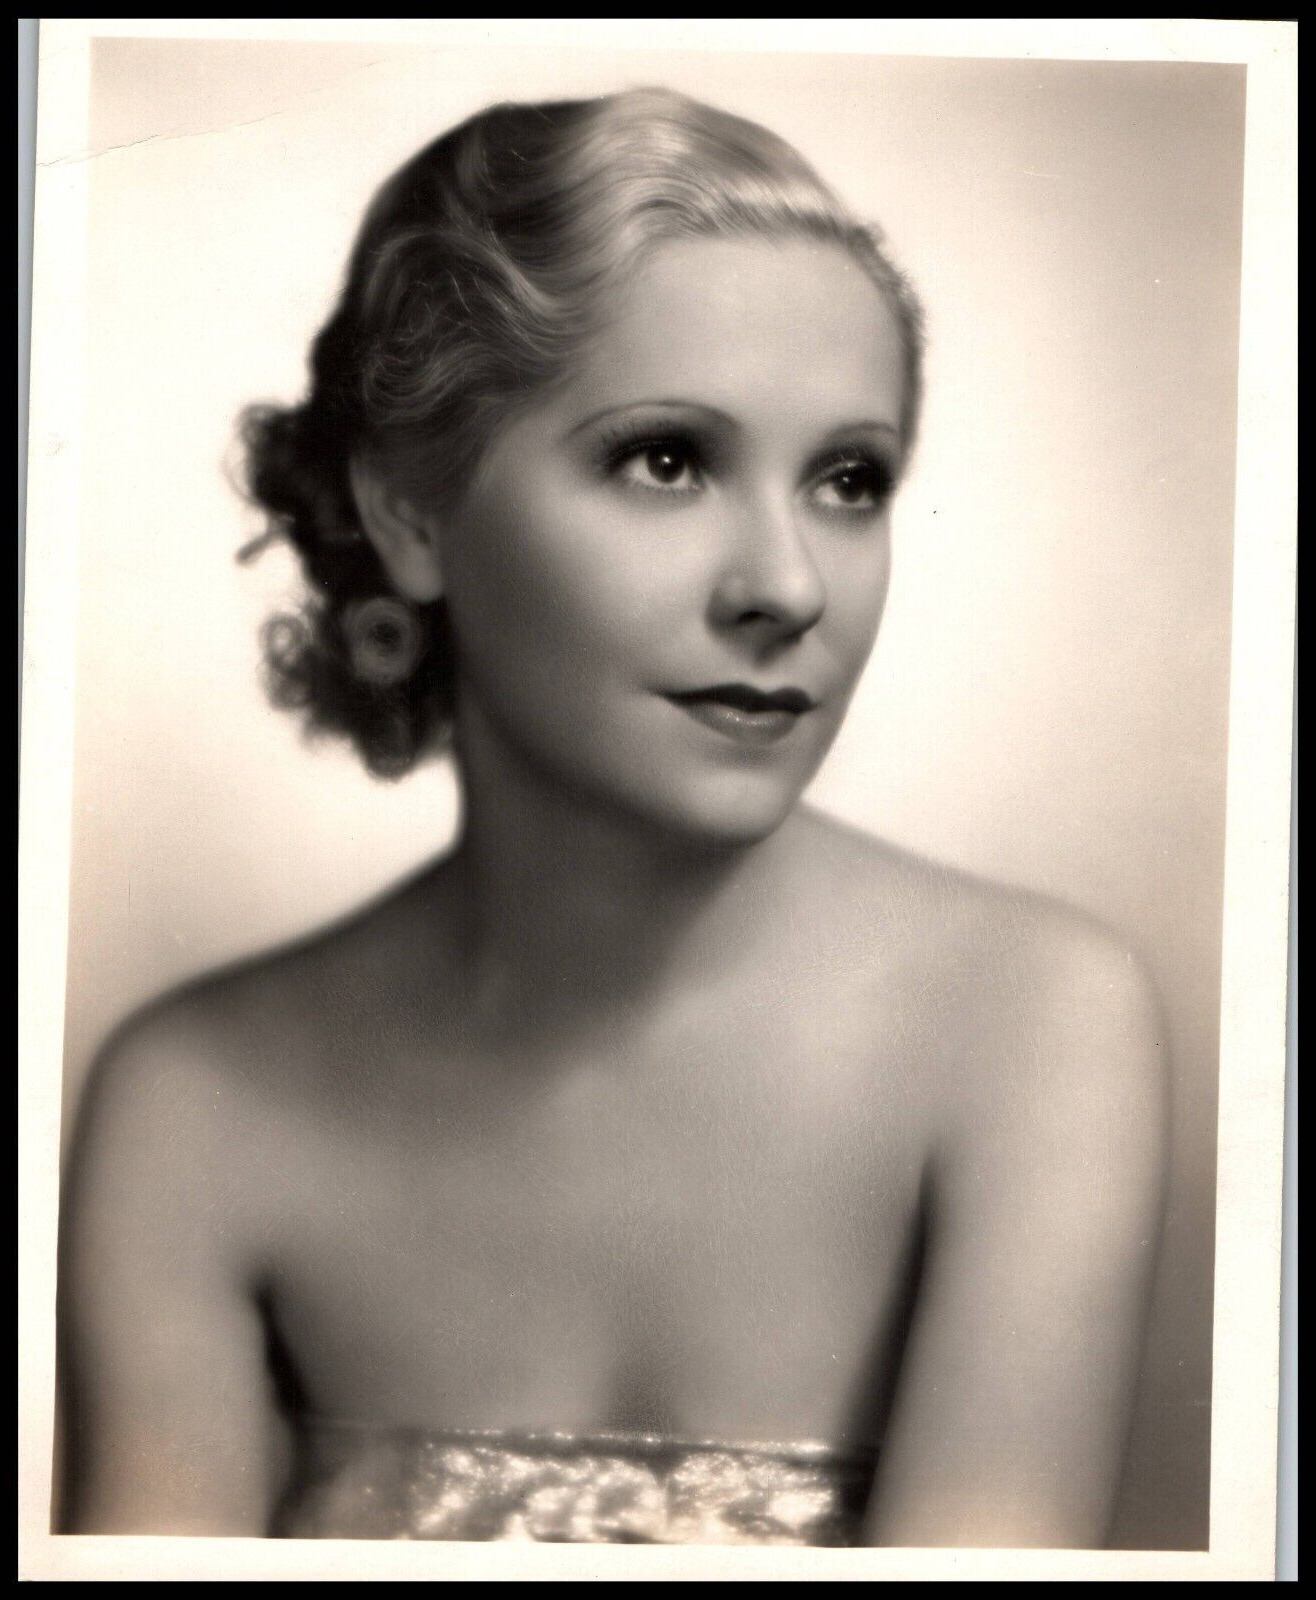 Hollywood Beauty JUNE CLYDE STUNNING PORTRAIT 1930s FREULICH DBW Photo 668